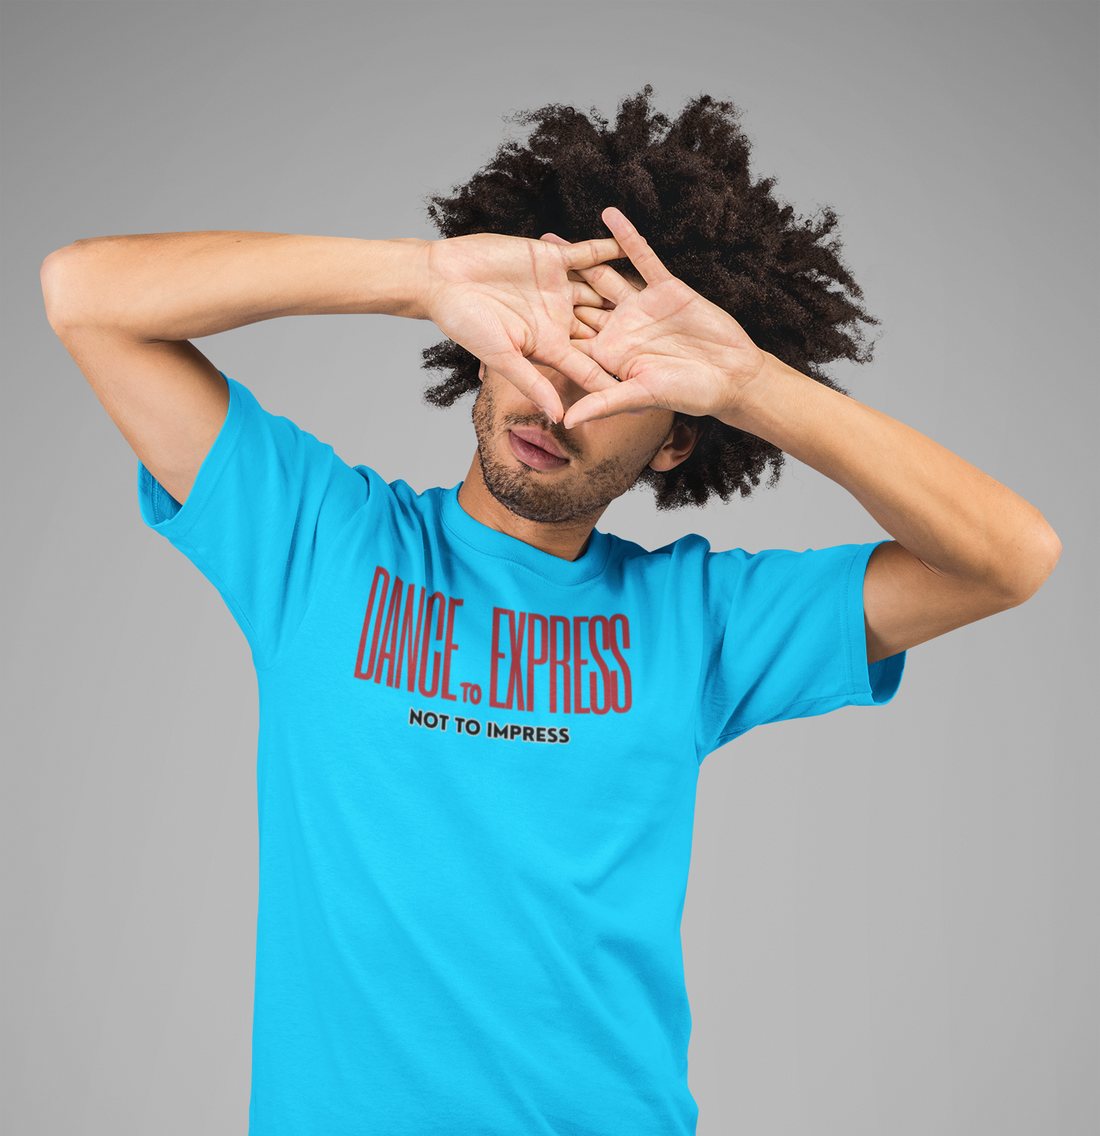 A male wearing a light blue music tshirt with the text "dance to express not to impress"